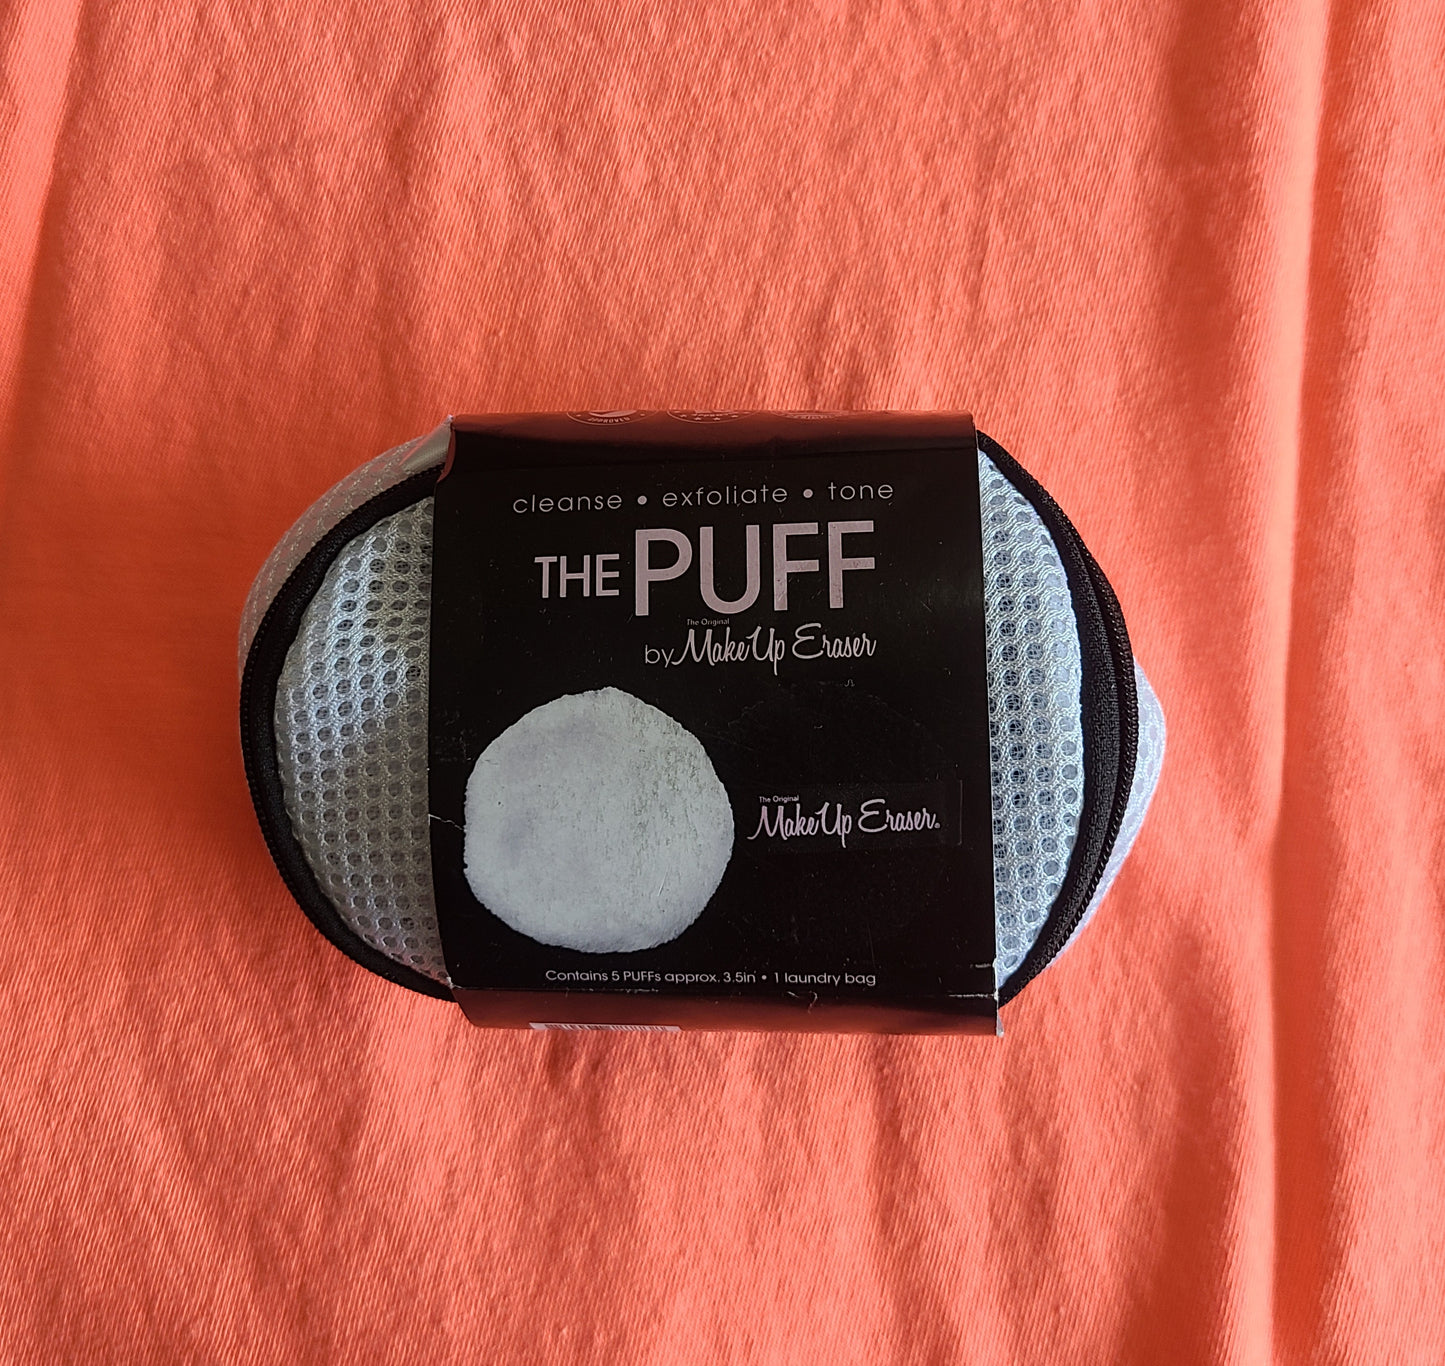 The Puff